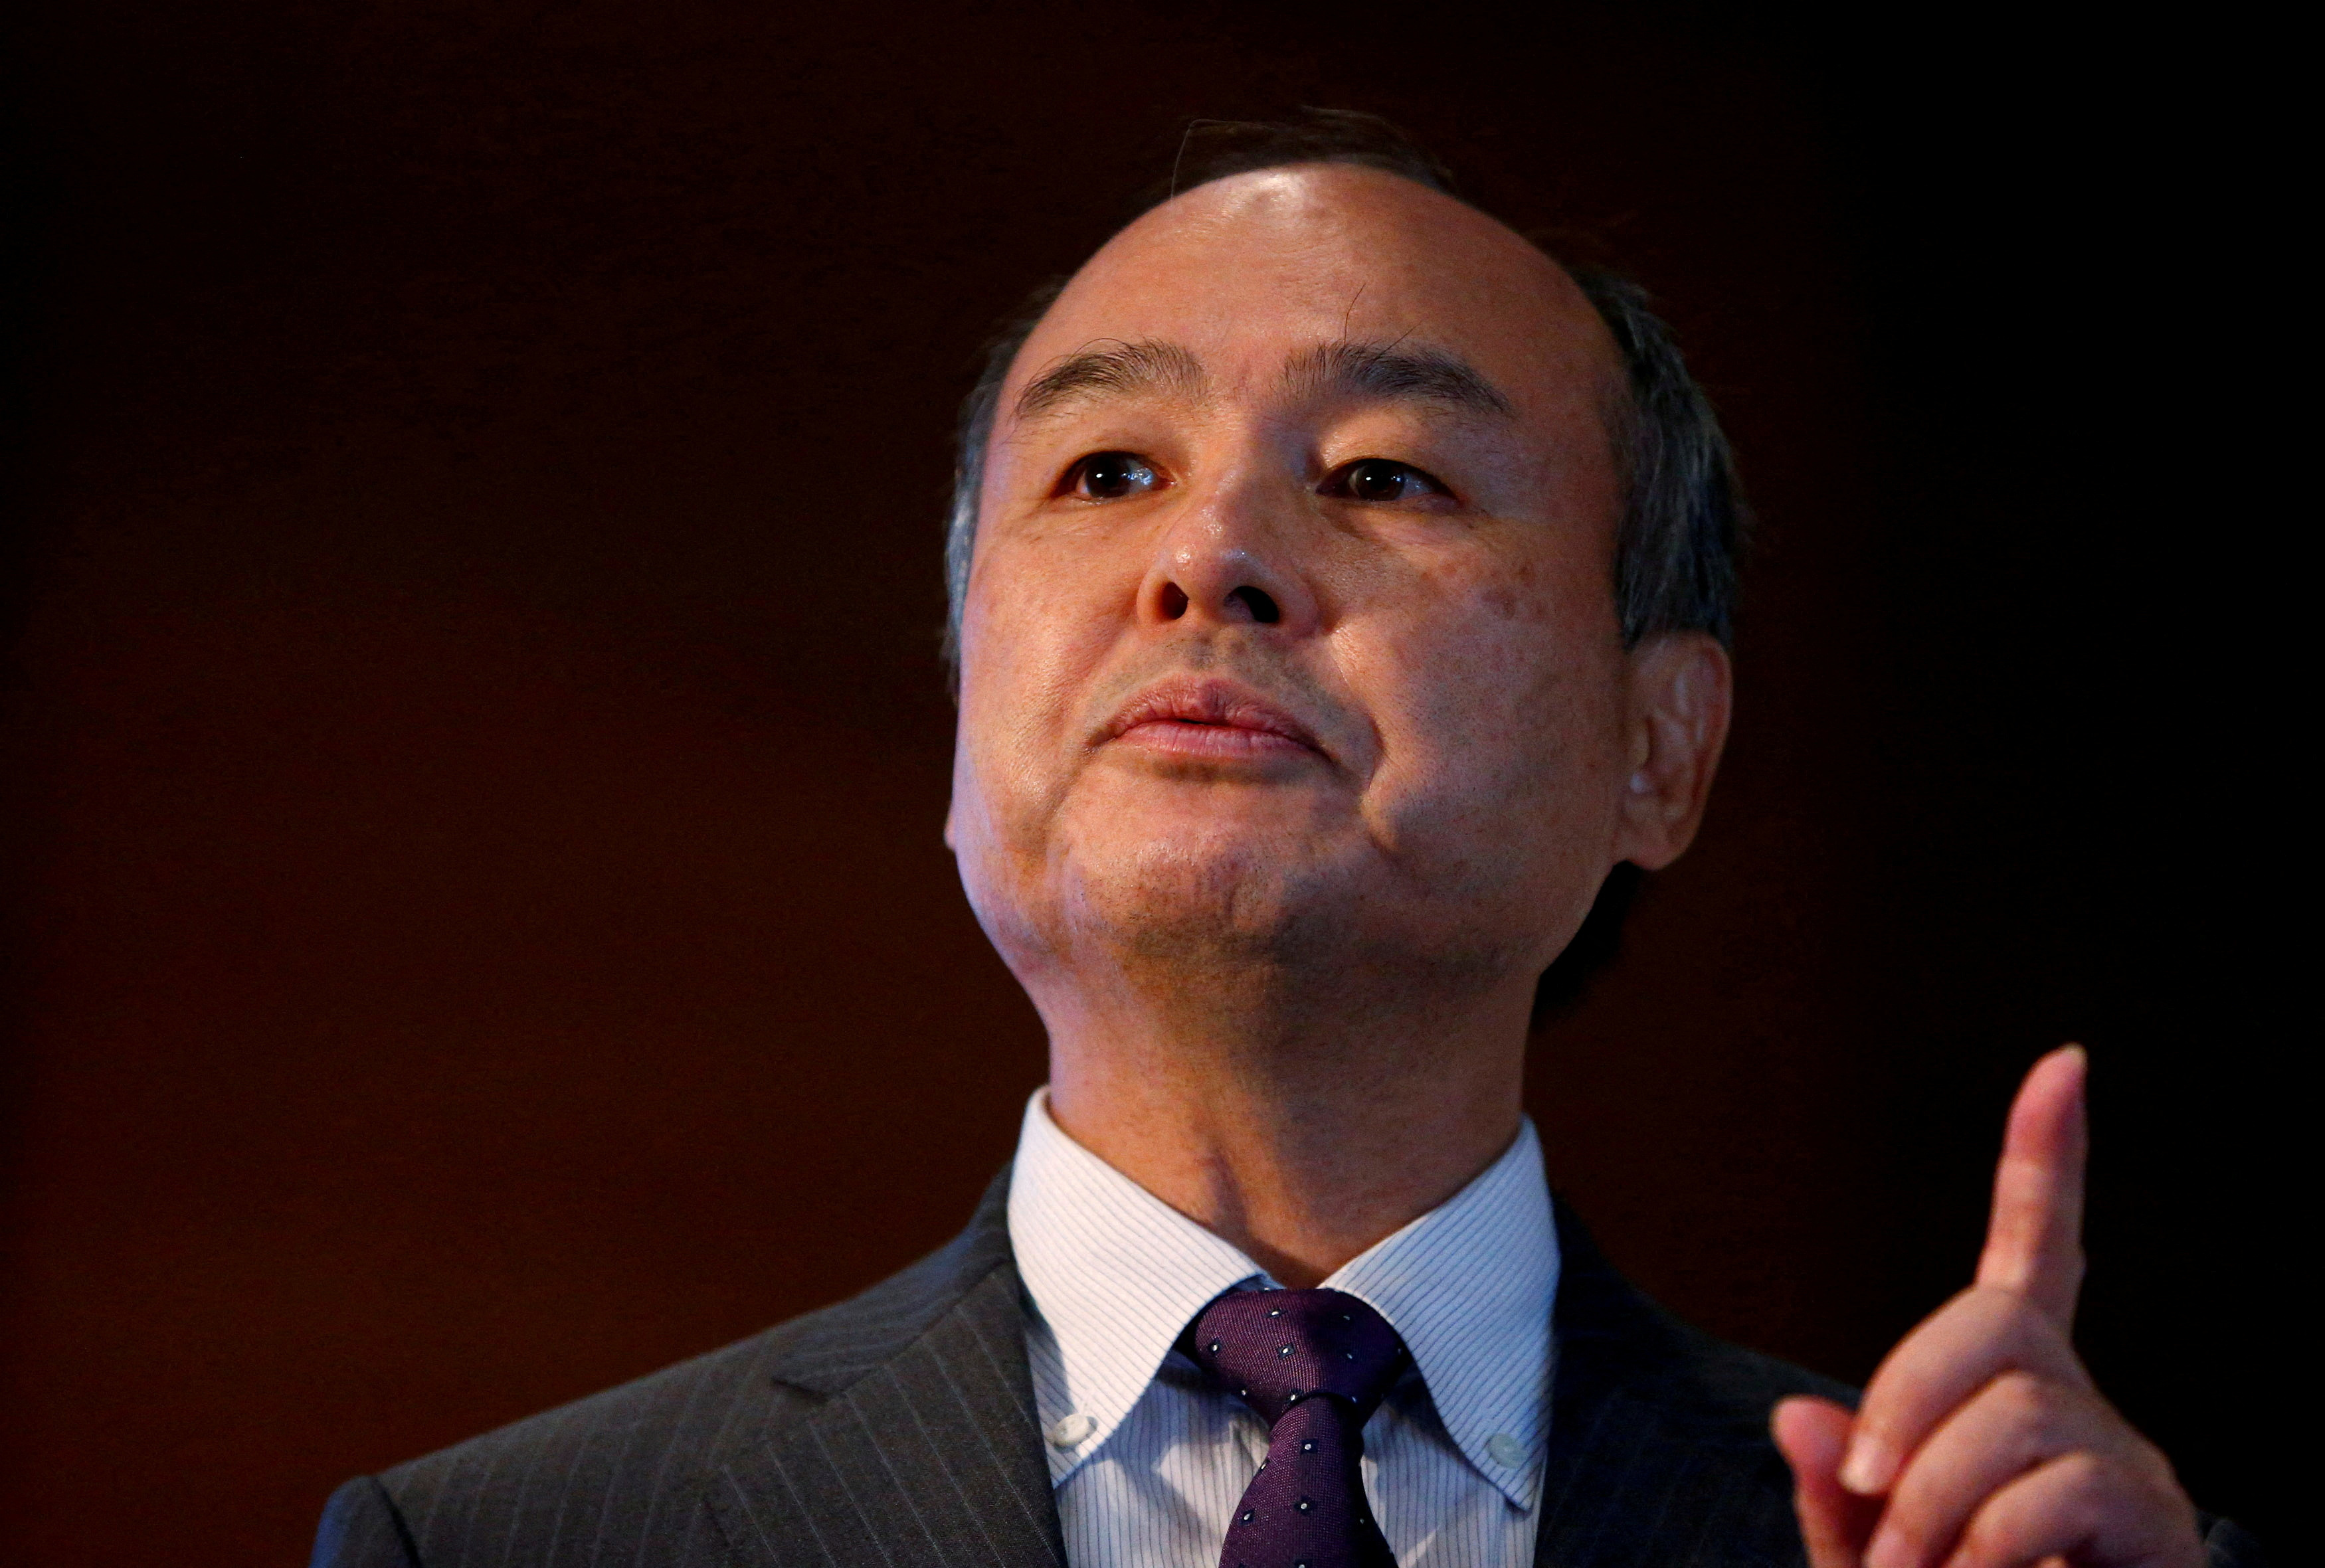 SoftBank Group CEO Masayoshi Son speaks at a news conference in London